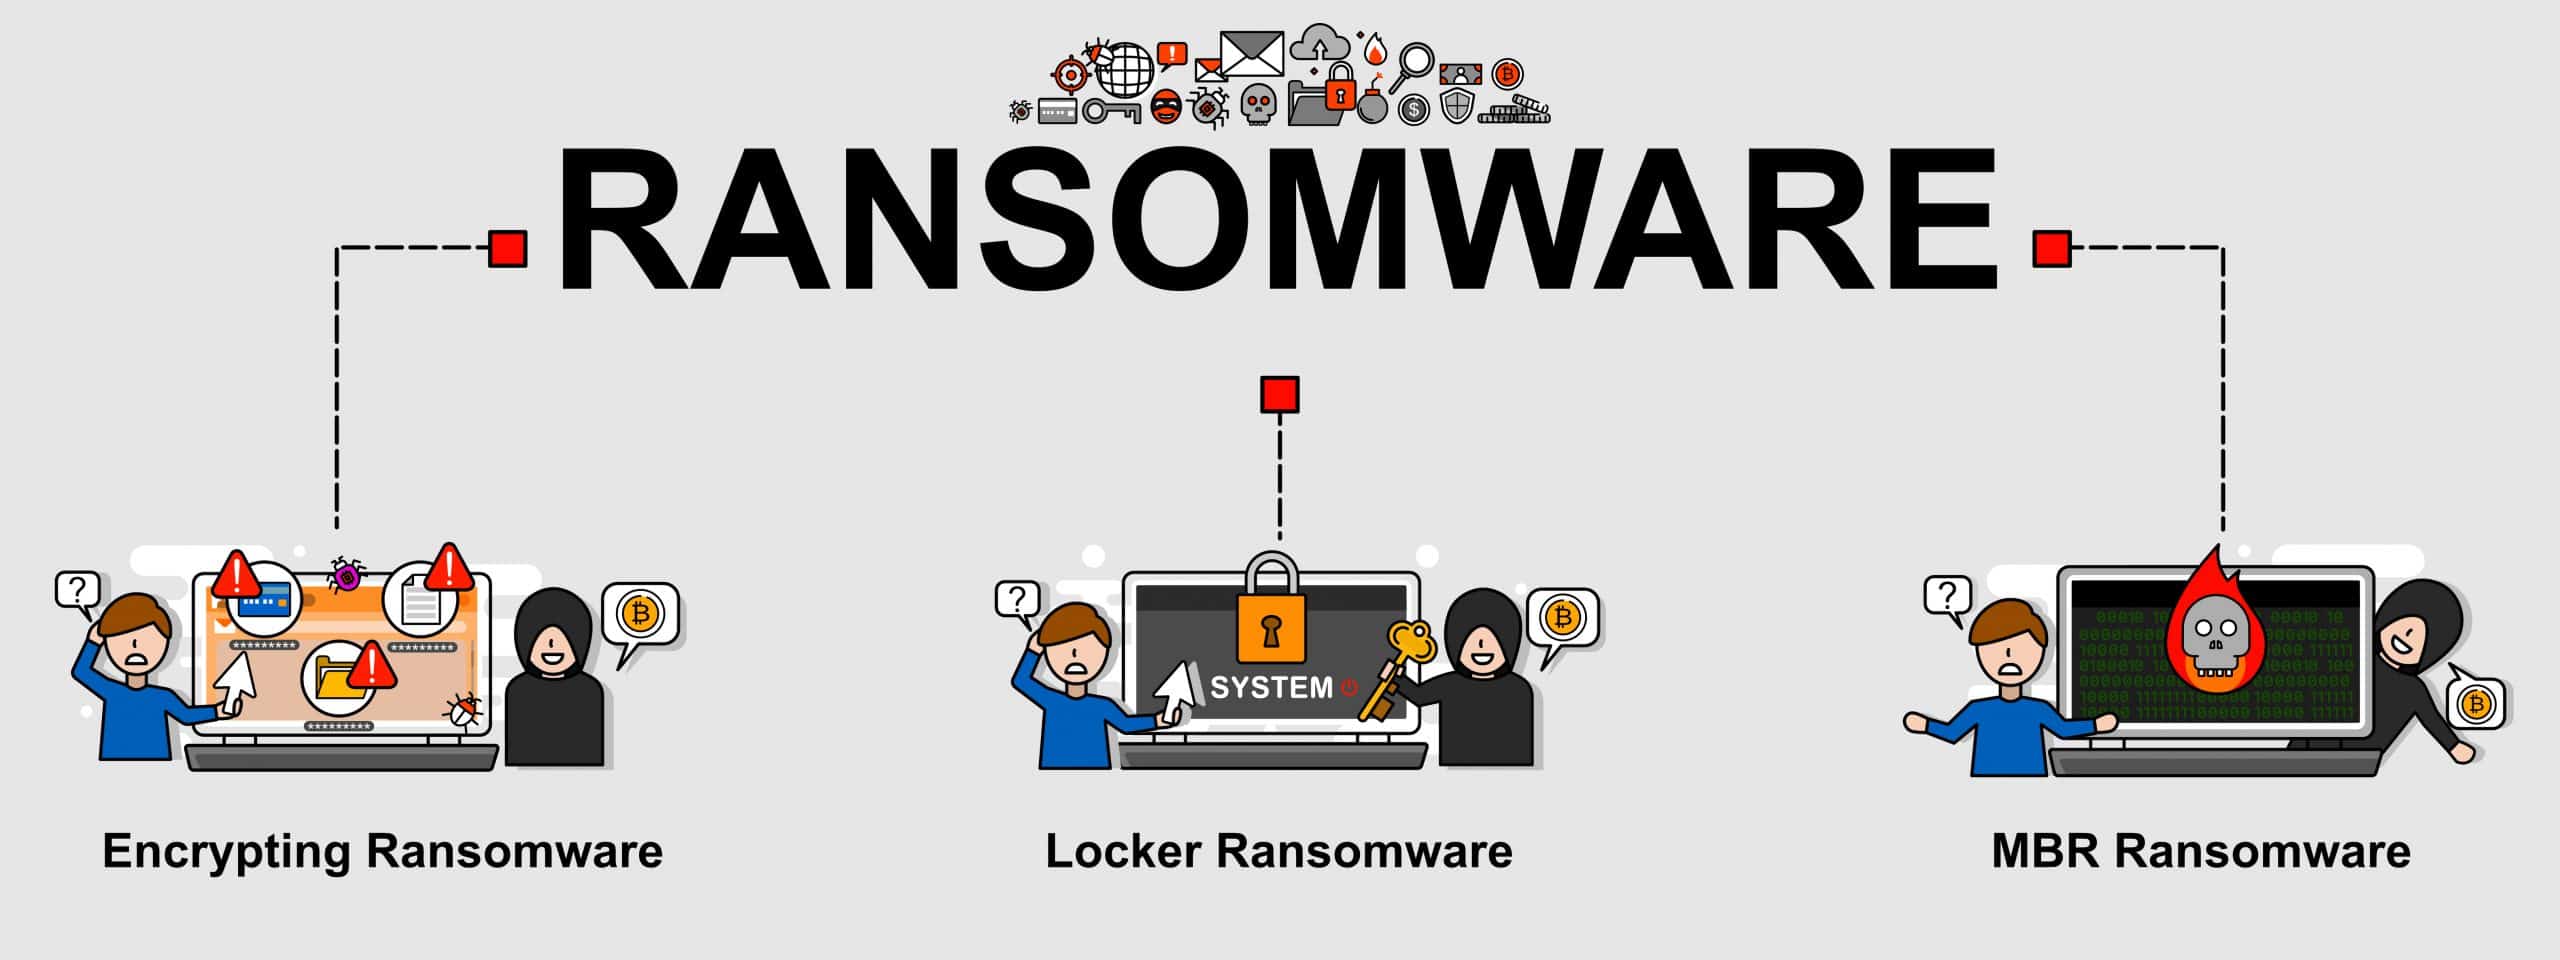 Your Managed Services Provider as an Ally against Ransomware